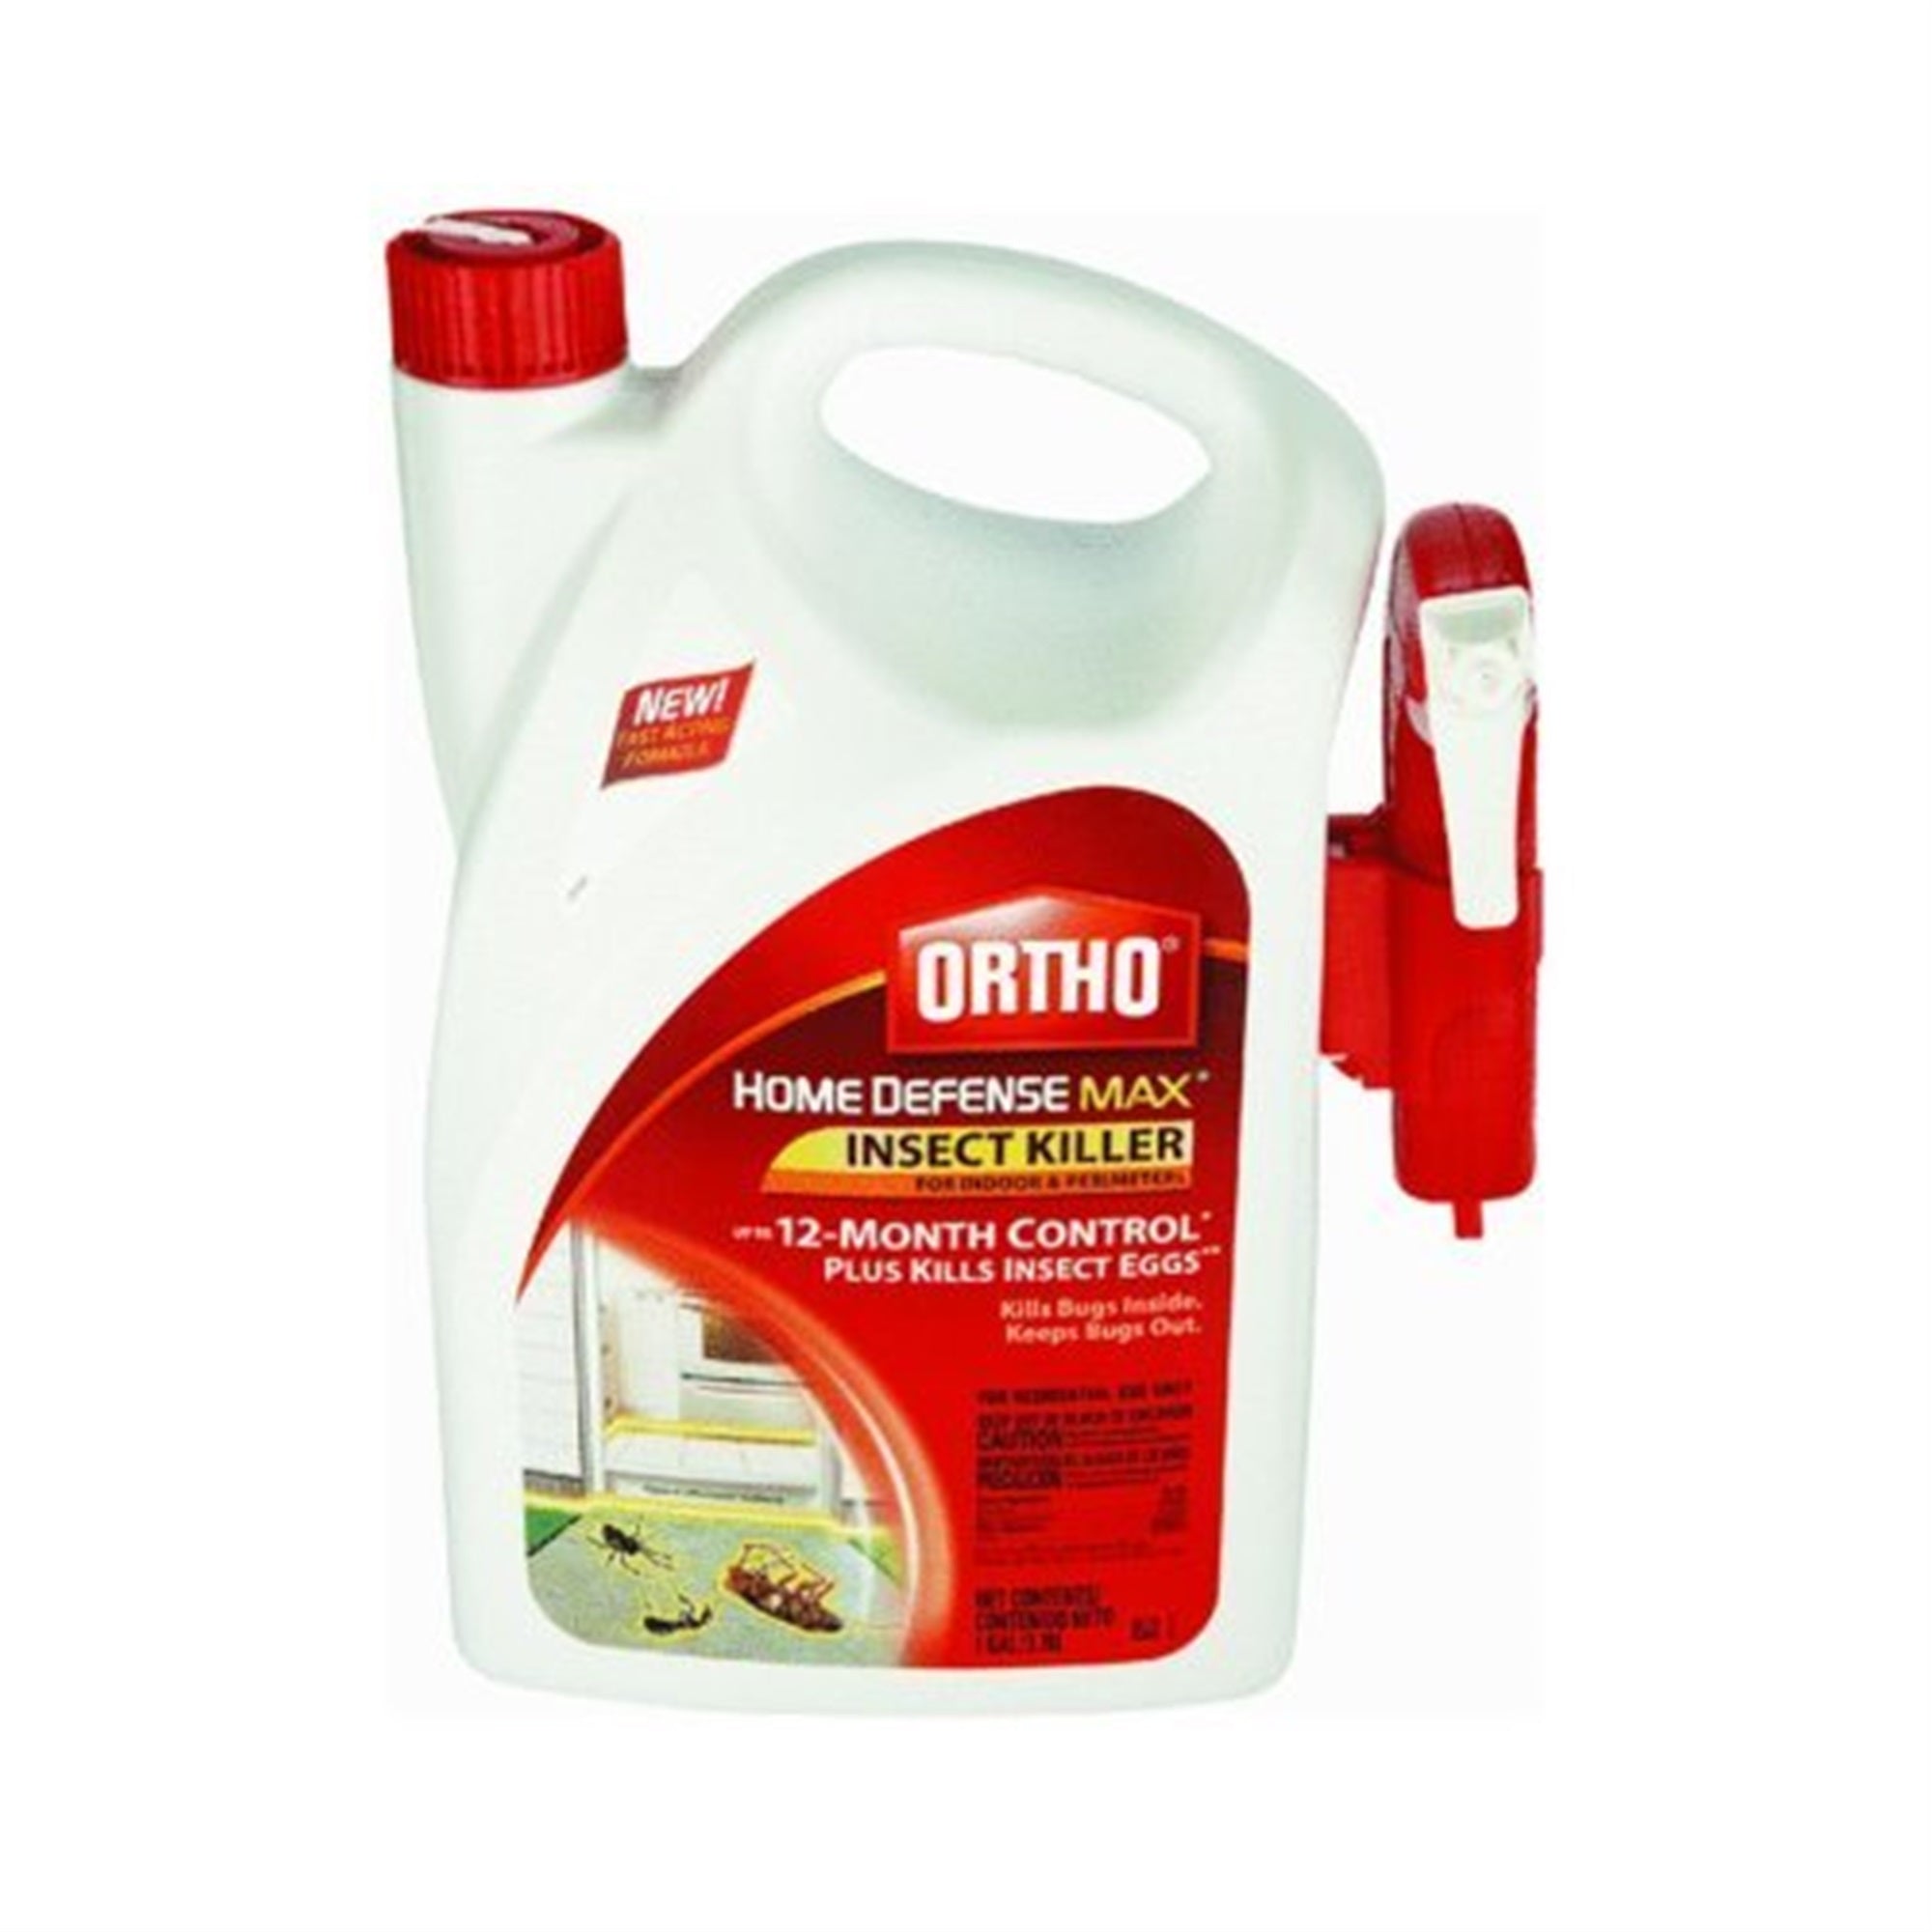 Ortho 0196710 Home Defense MAX Insect Killer Spray for Indoor/Home Perimeter, 1-Gallon